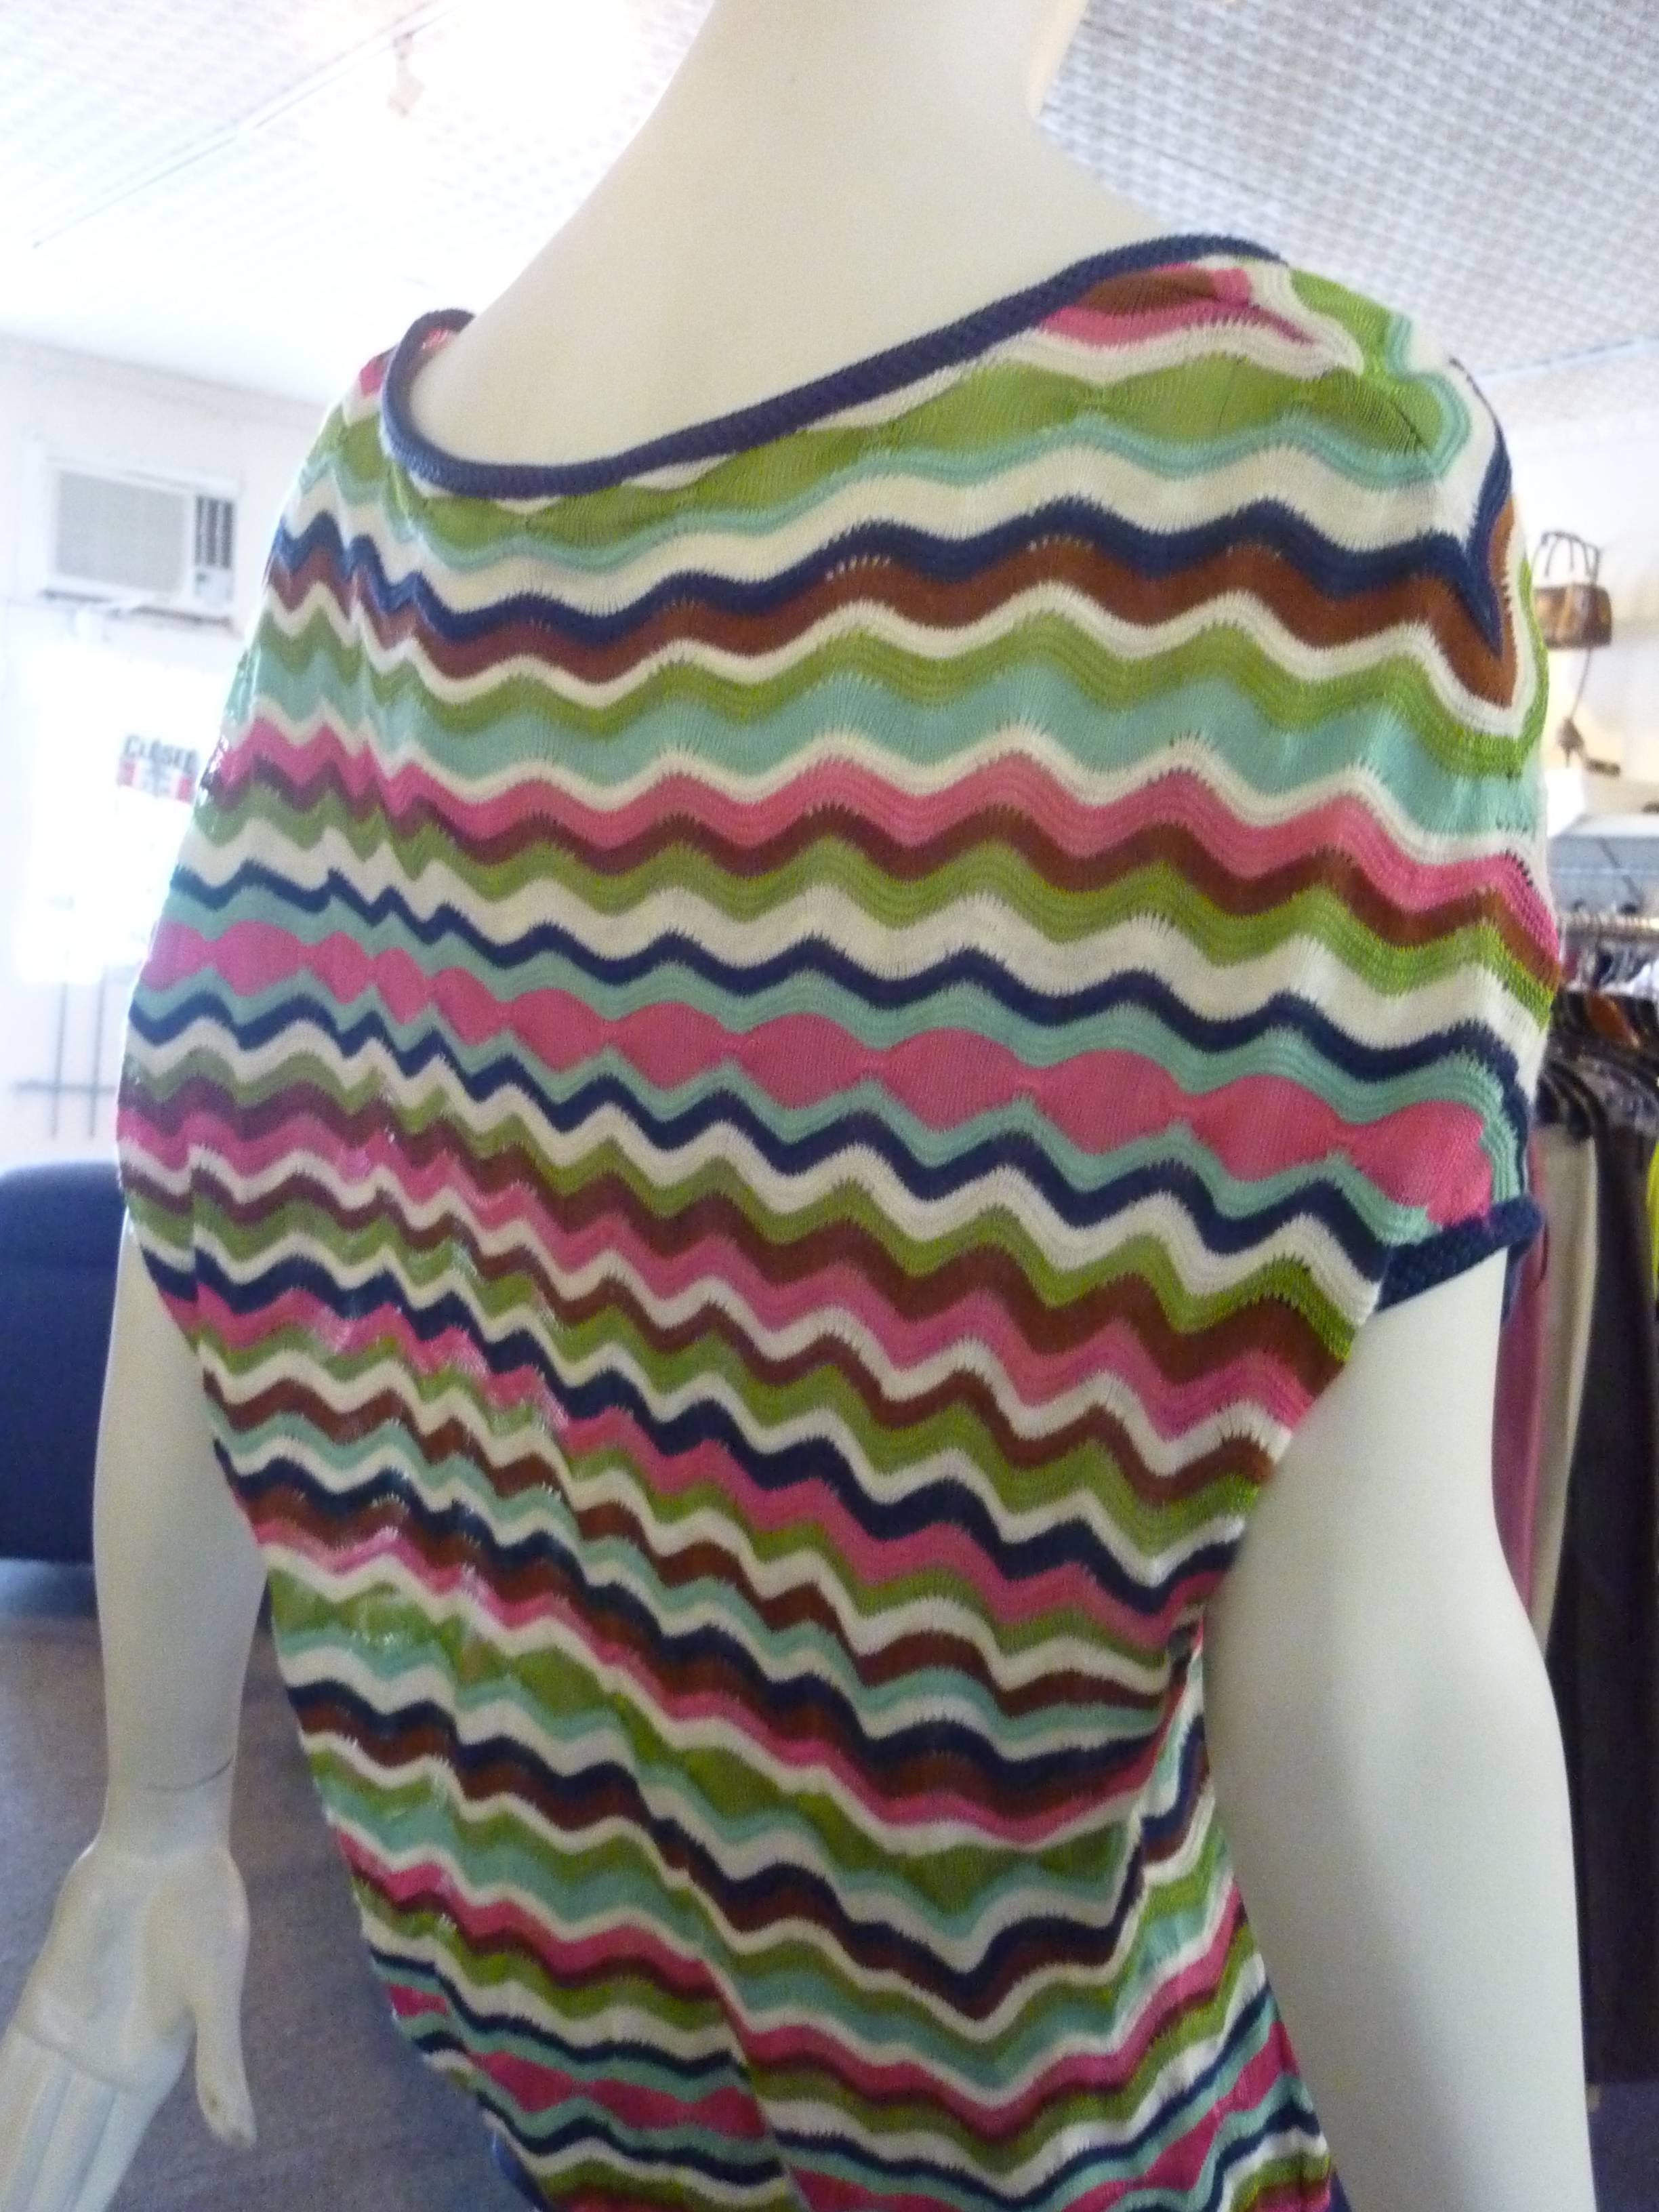 Wave, open weave pattern, bordered in navy blue, with pink, green,brown, white and blue being the predominant colors.

This top has dropped shoulders and a hint of sleeves.